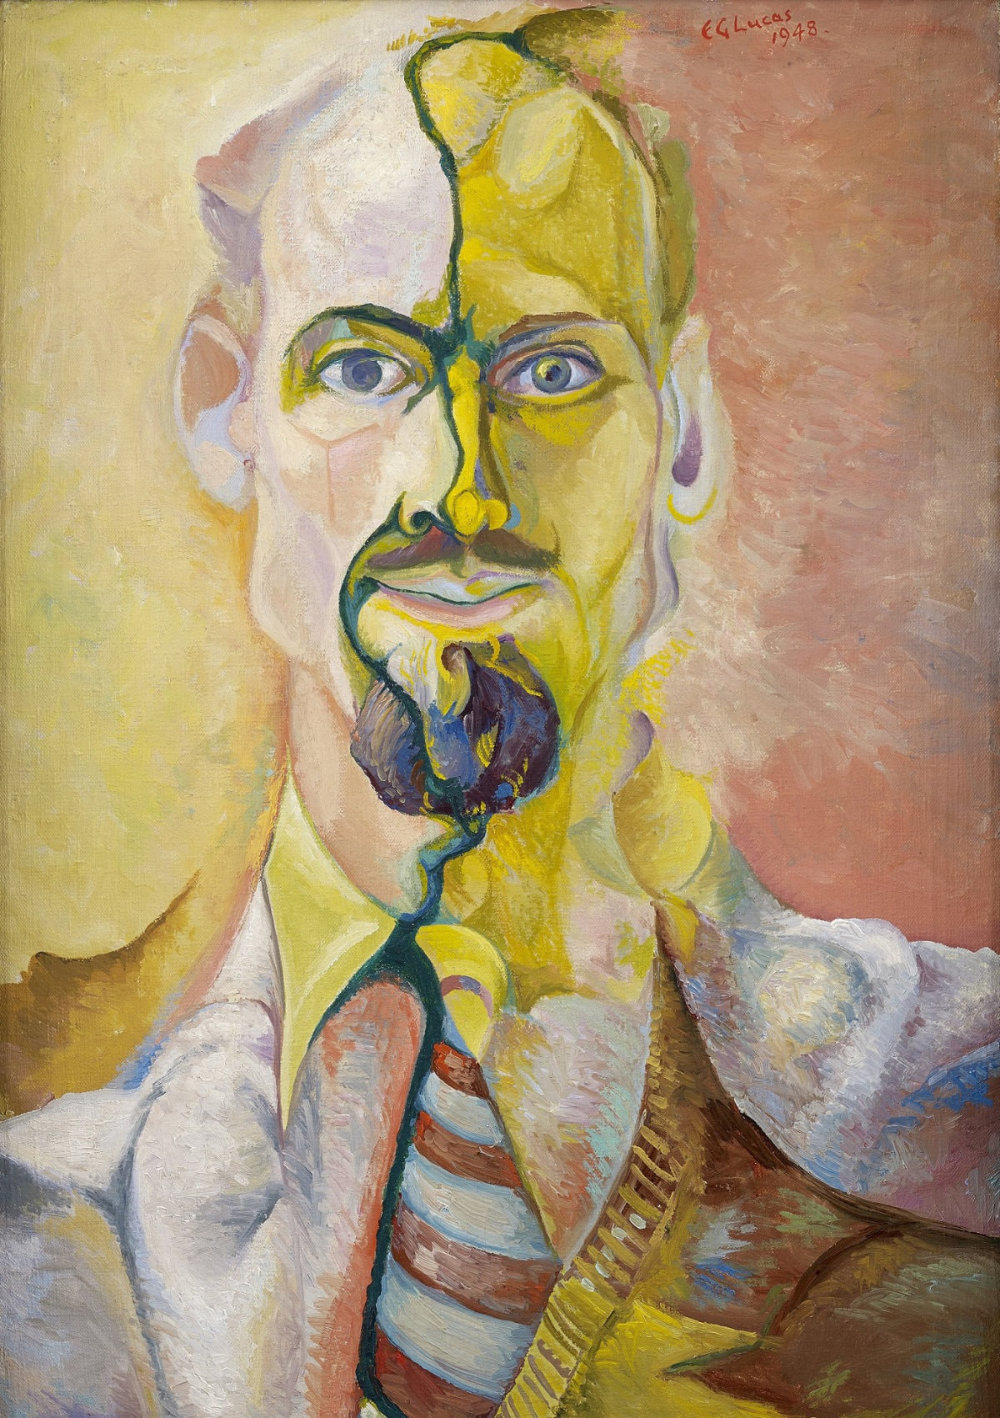 Edwin G. Lucas, Self-Portrait, 1948, Lucas Family Collection, copyright the artist’s estate (Photo by John McKenzie), art exhibitions in August